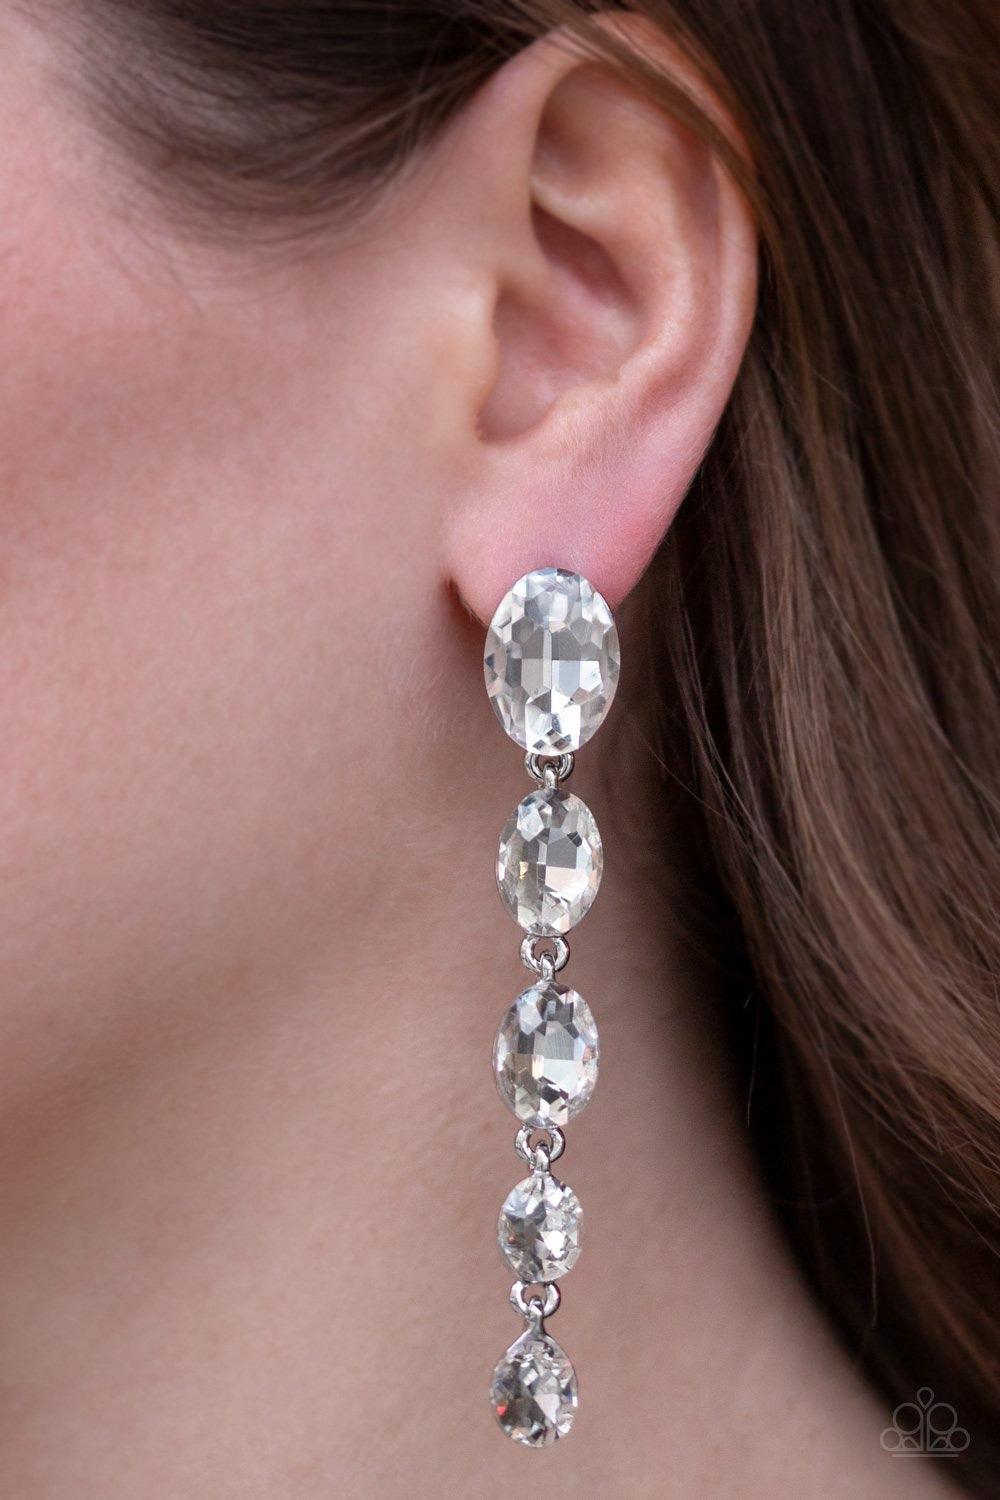 Paparazzi Accessories Red Carpet Radiance - White Gradually decreasing in size, glittery white gems trickle from the ear in a glamorous fashion. Earring attaches to a standard post fitting. Jewelry